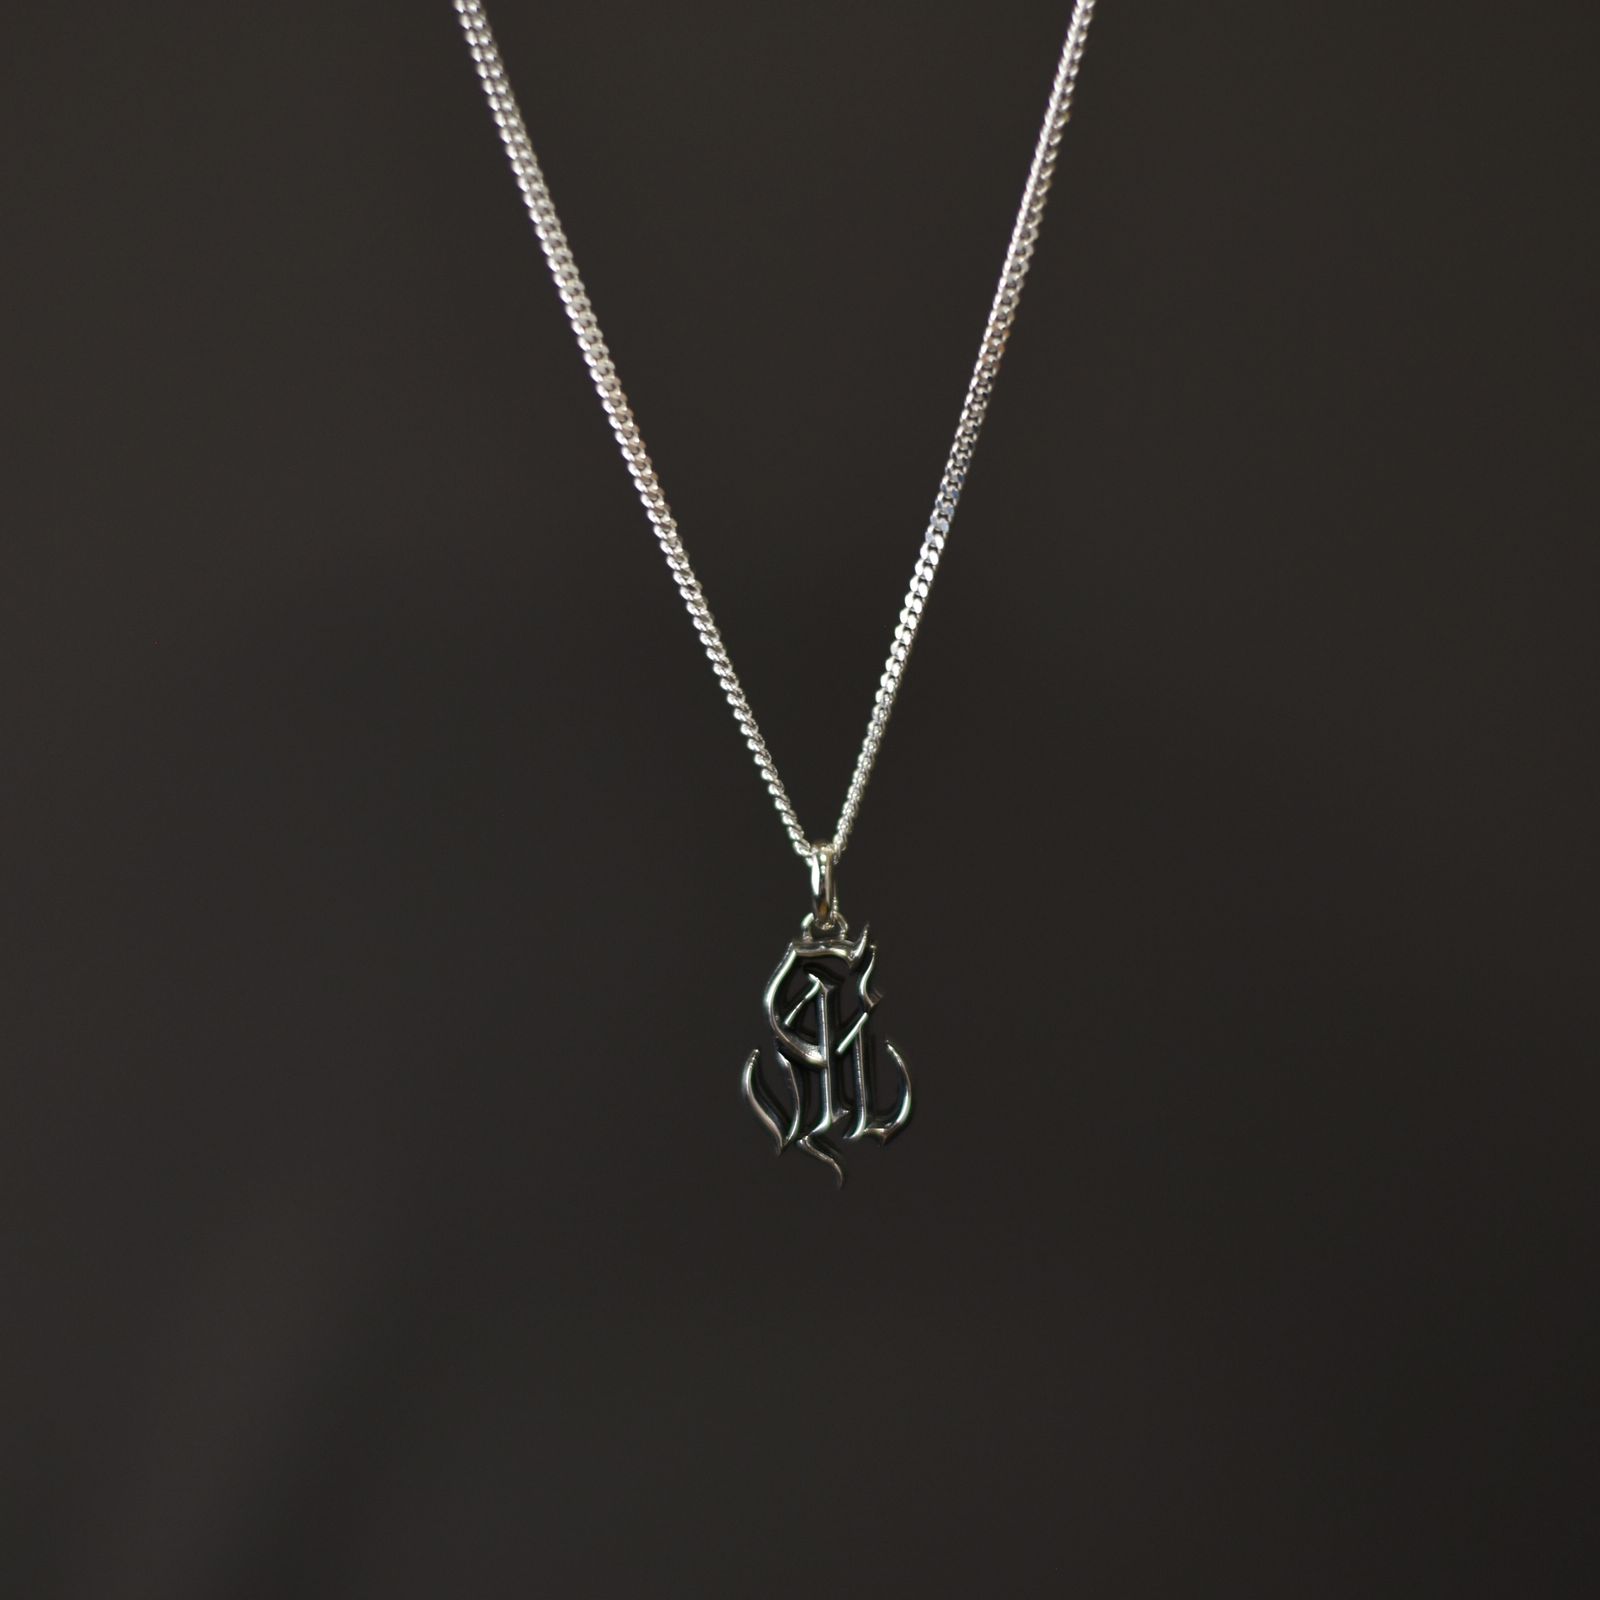 CALEE - CAL NT LOGO SILVER NECKLACE (SILVER) / シルバー 